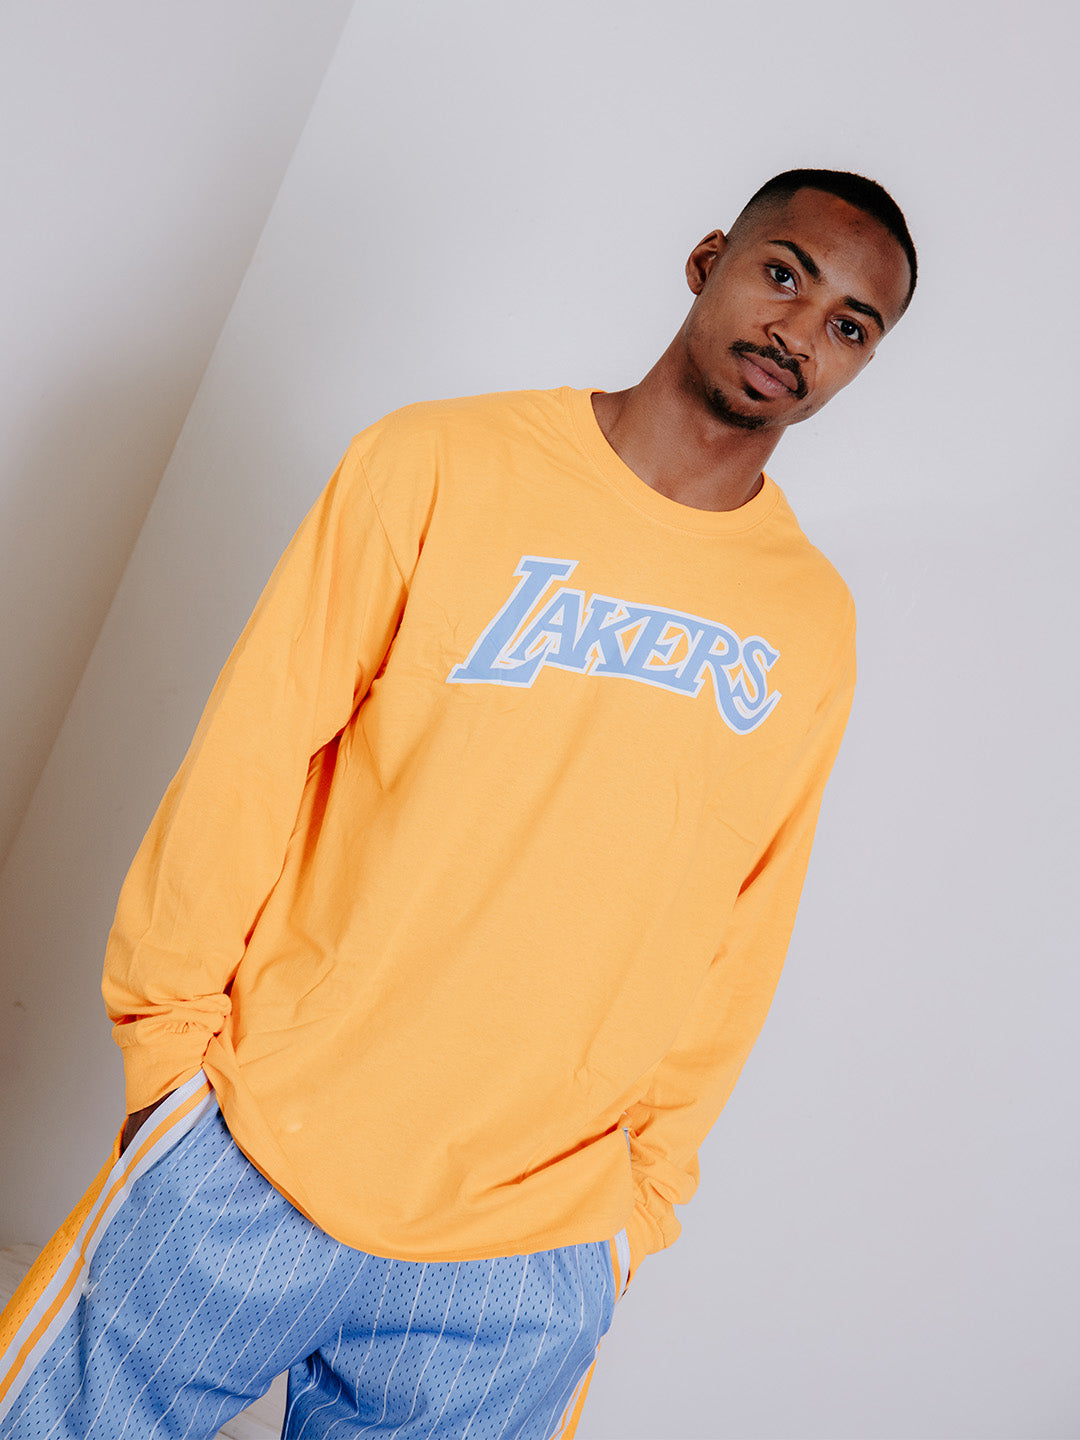 UNINTERRUPTED X Mitchell & Ness Legends Long Sleeve Tee Lakers - On Body